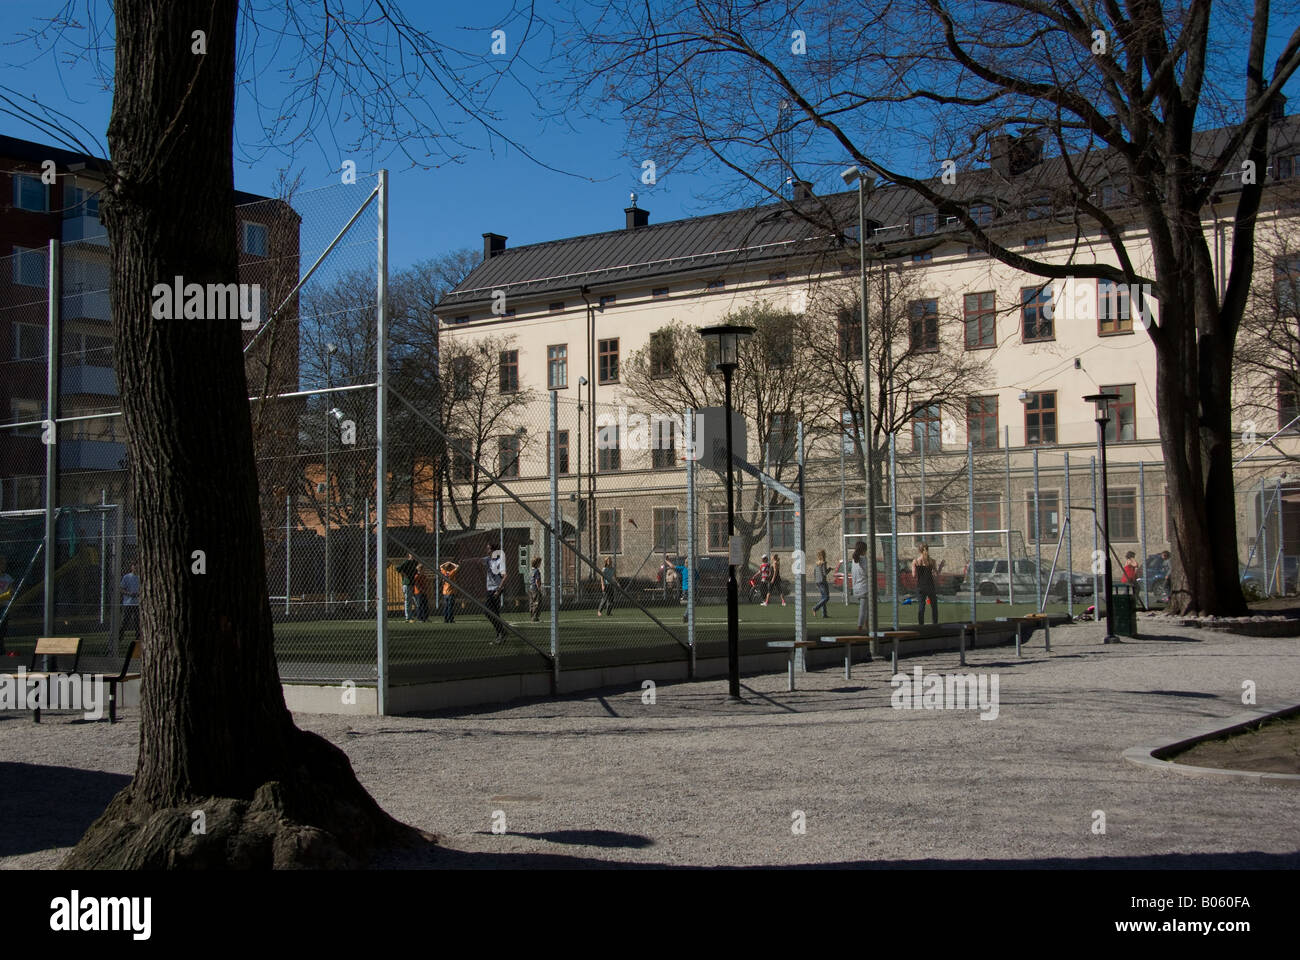 Children playing basket ball on a fenced court in stockholm Stock Photo